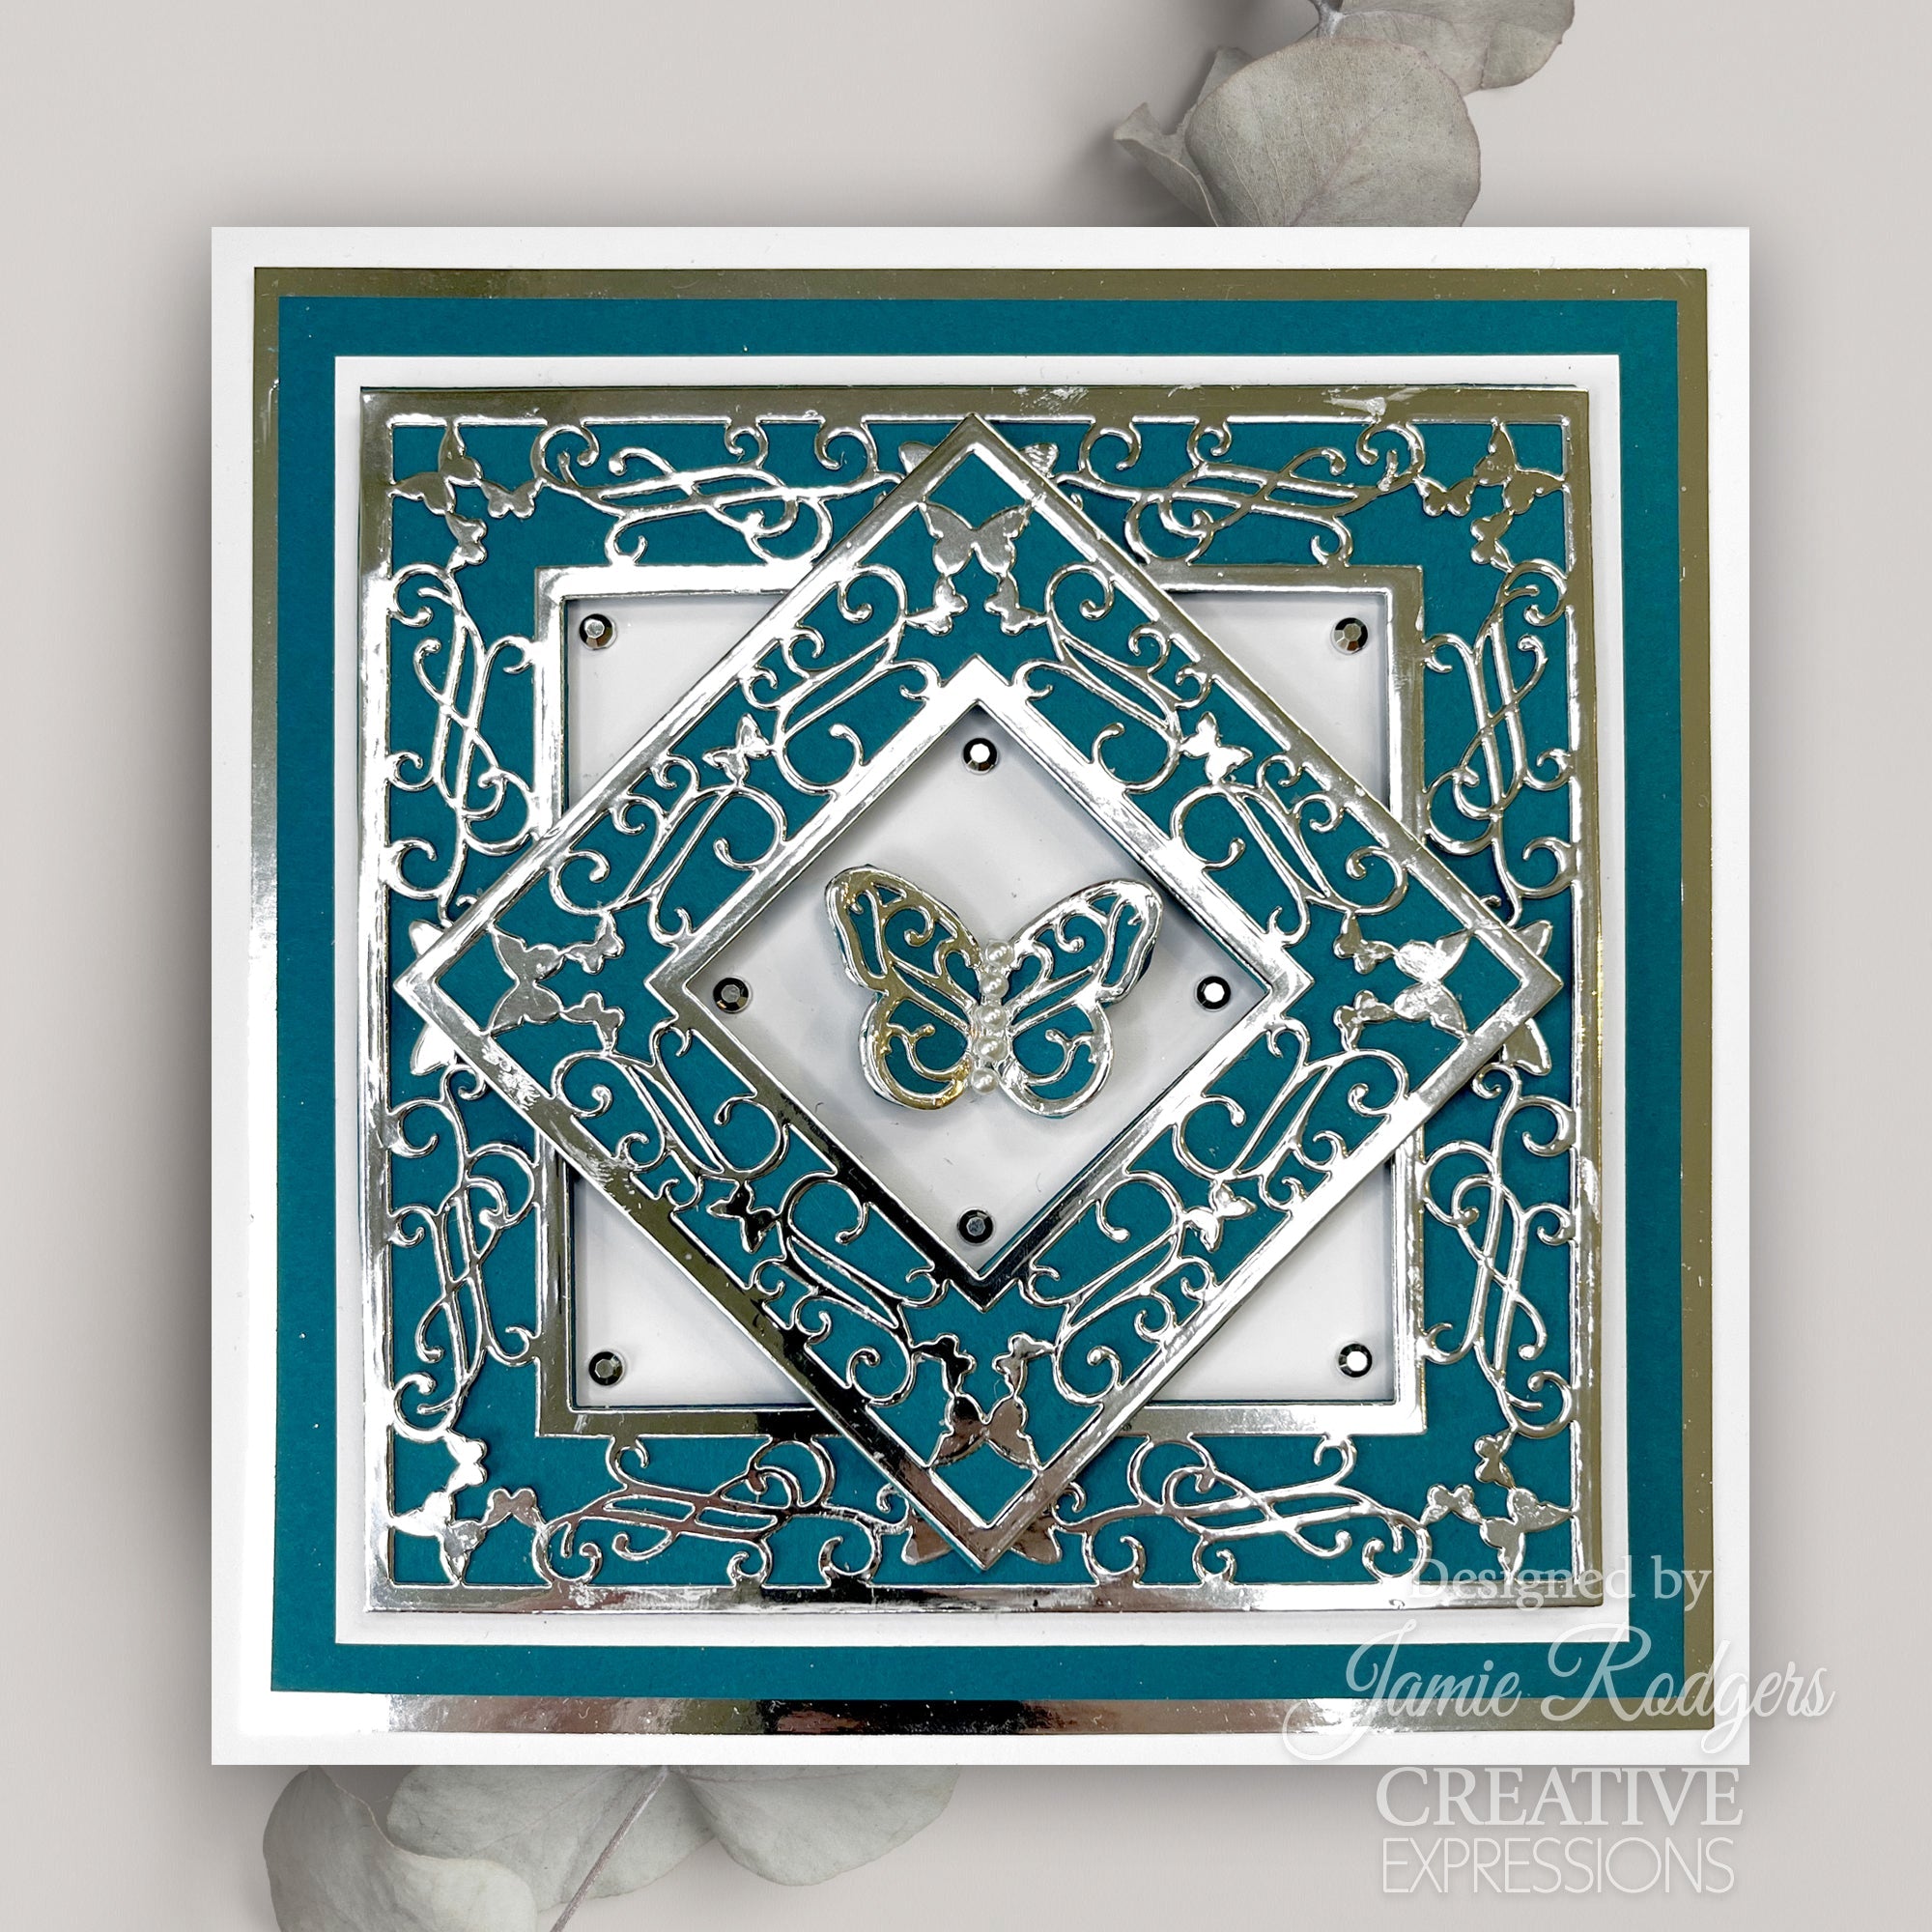 Creative Expressions Jamie Rodgers Butterfly Square Frame Craft Die